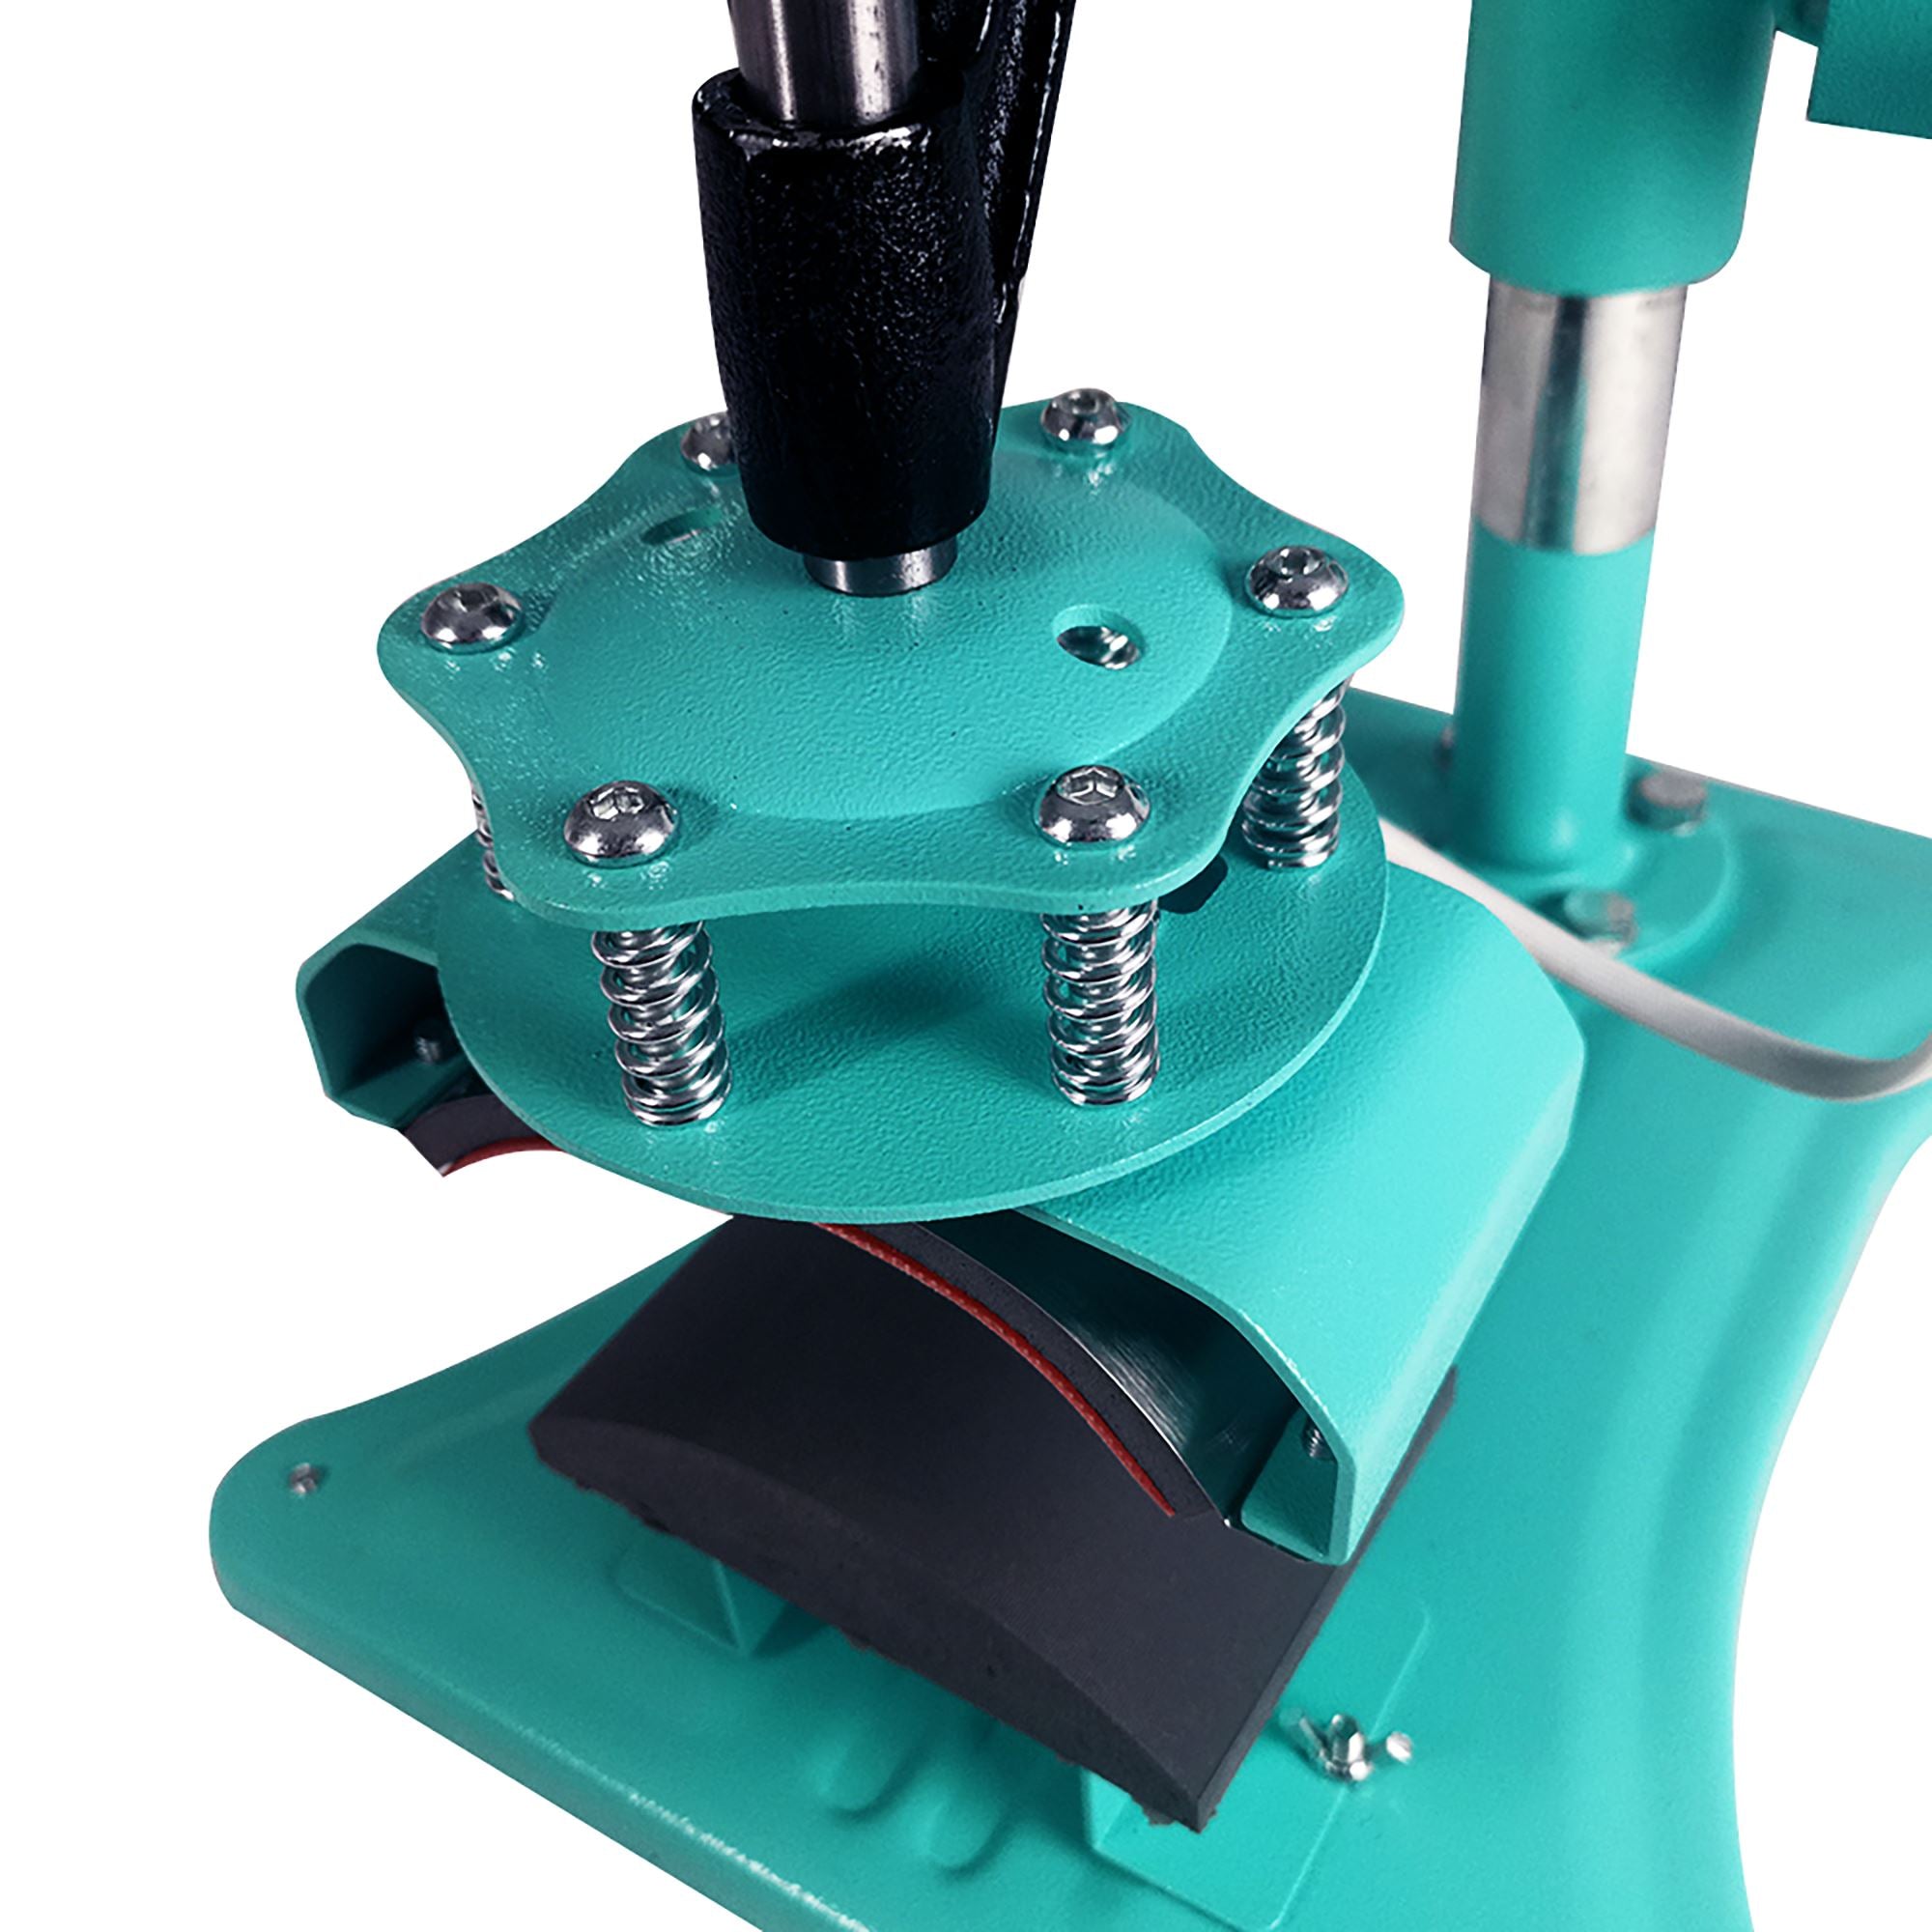 Refurbished Swing Design 15 x 15 Pro Slide Out Heat Press - Turquoise